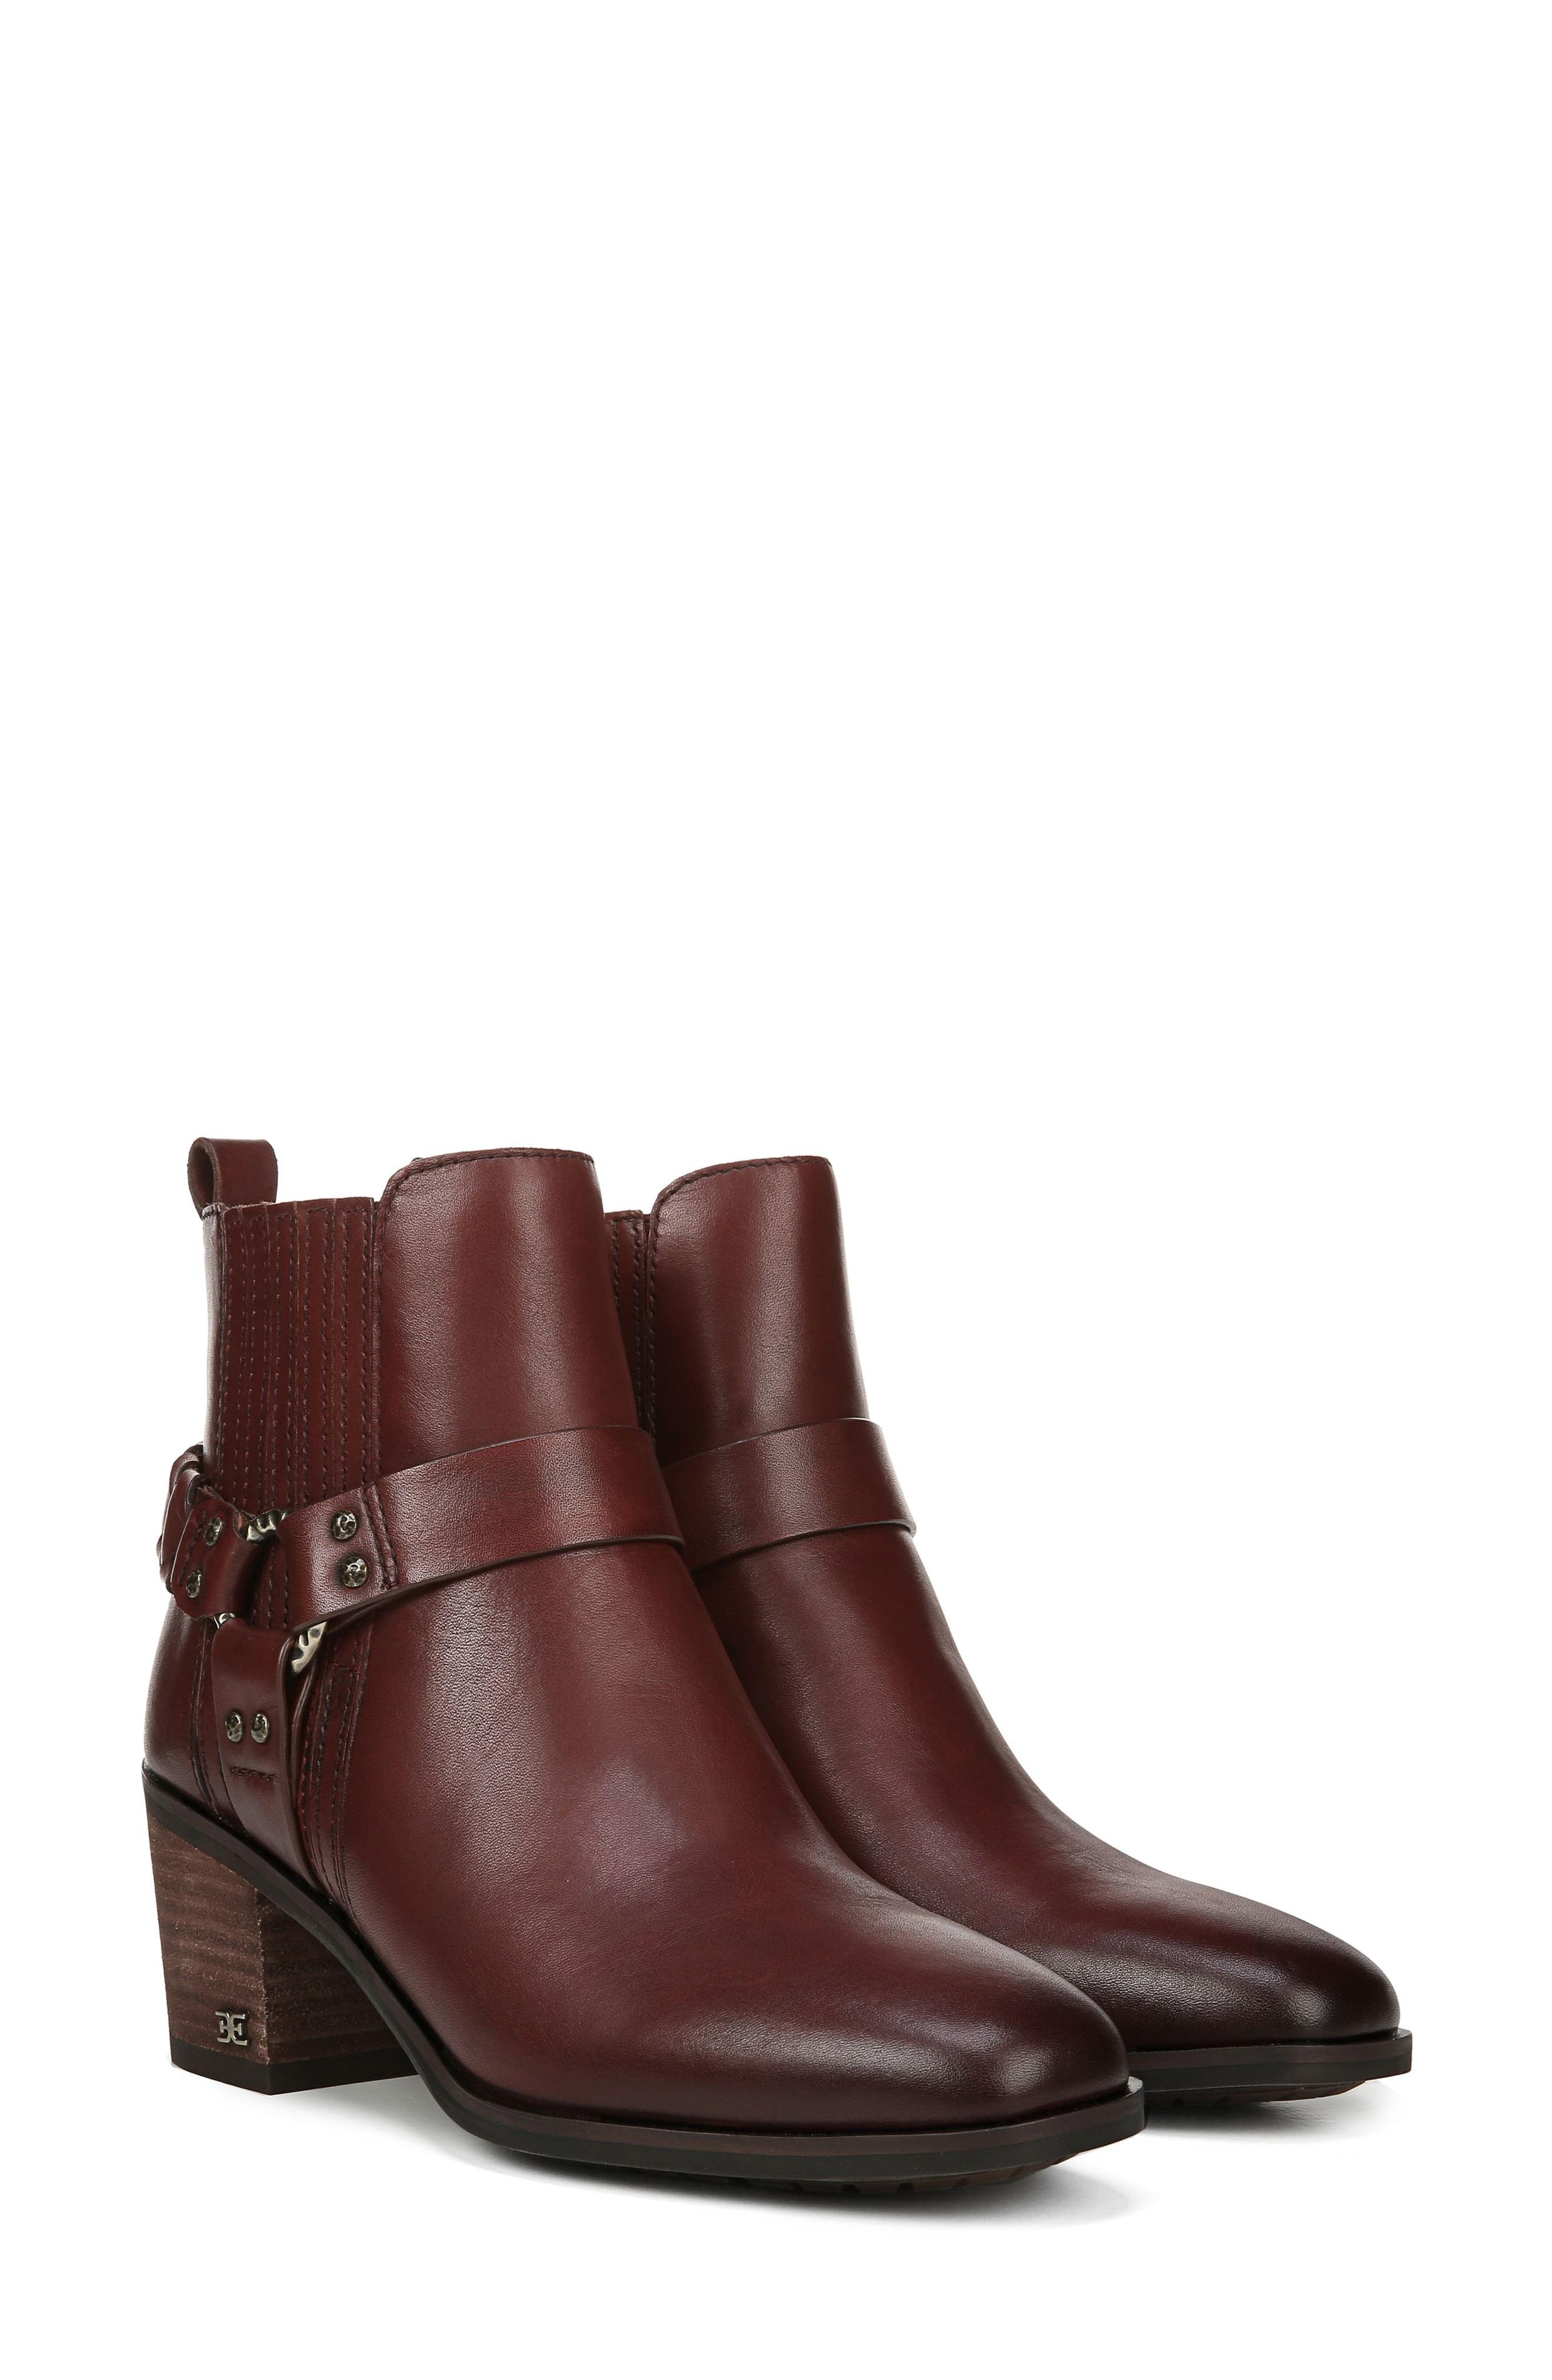 Sam Edelman Dalma Leather Harness Boot in Red - Lyst